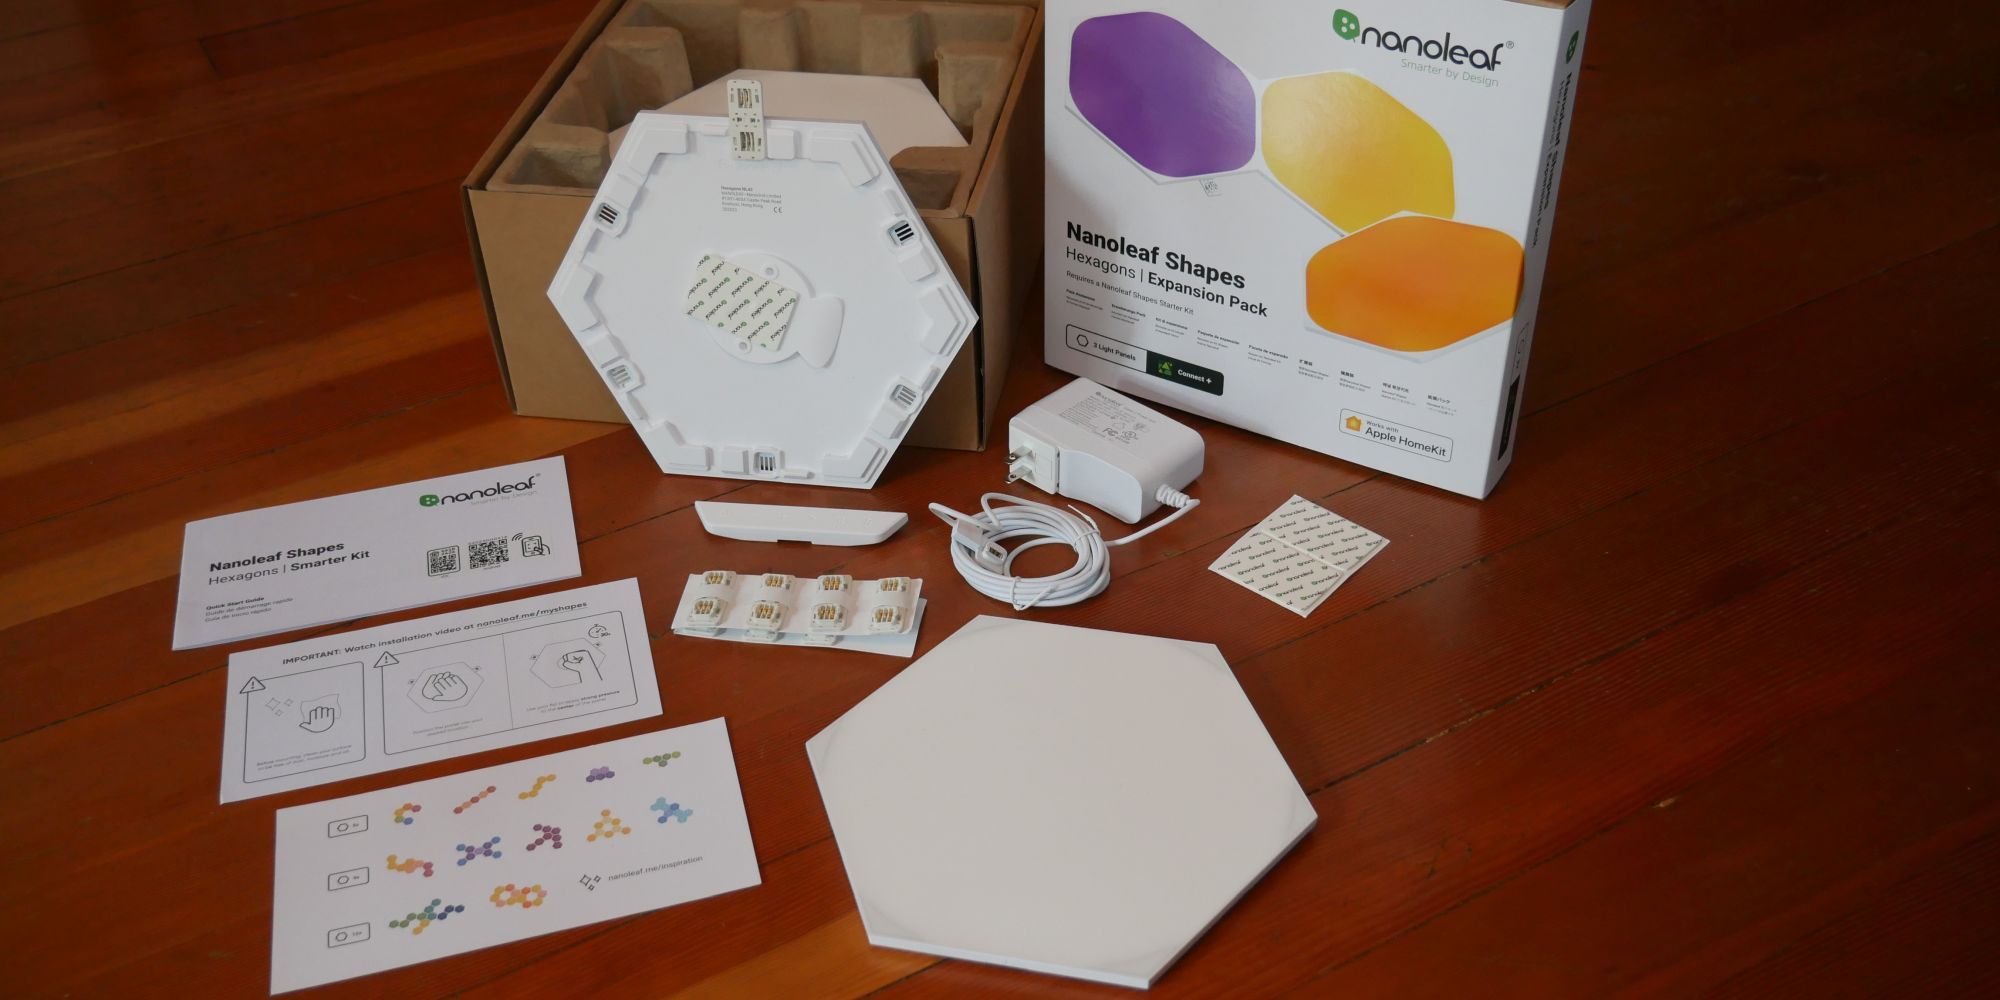 Nanoleaf Shapes Hexagons Smarter Kit unboxed and Expansion Pack next to it